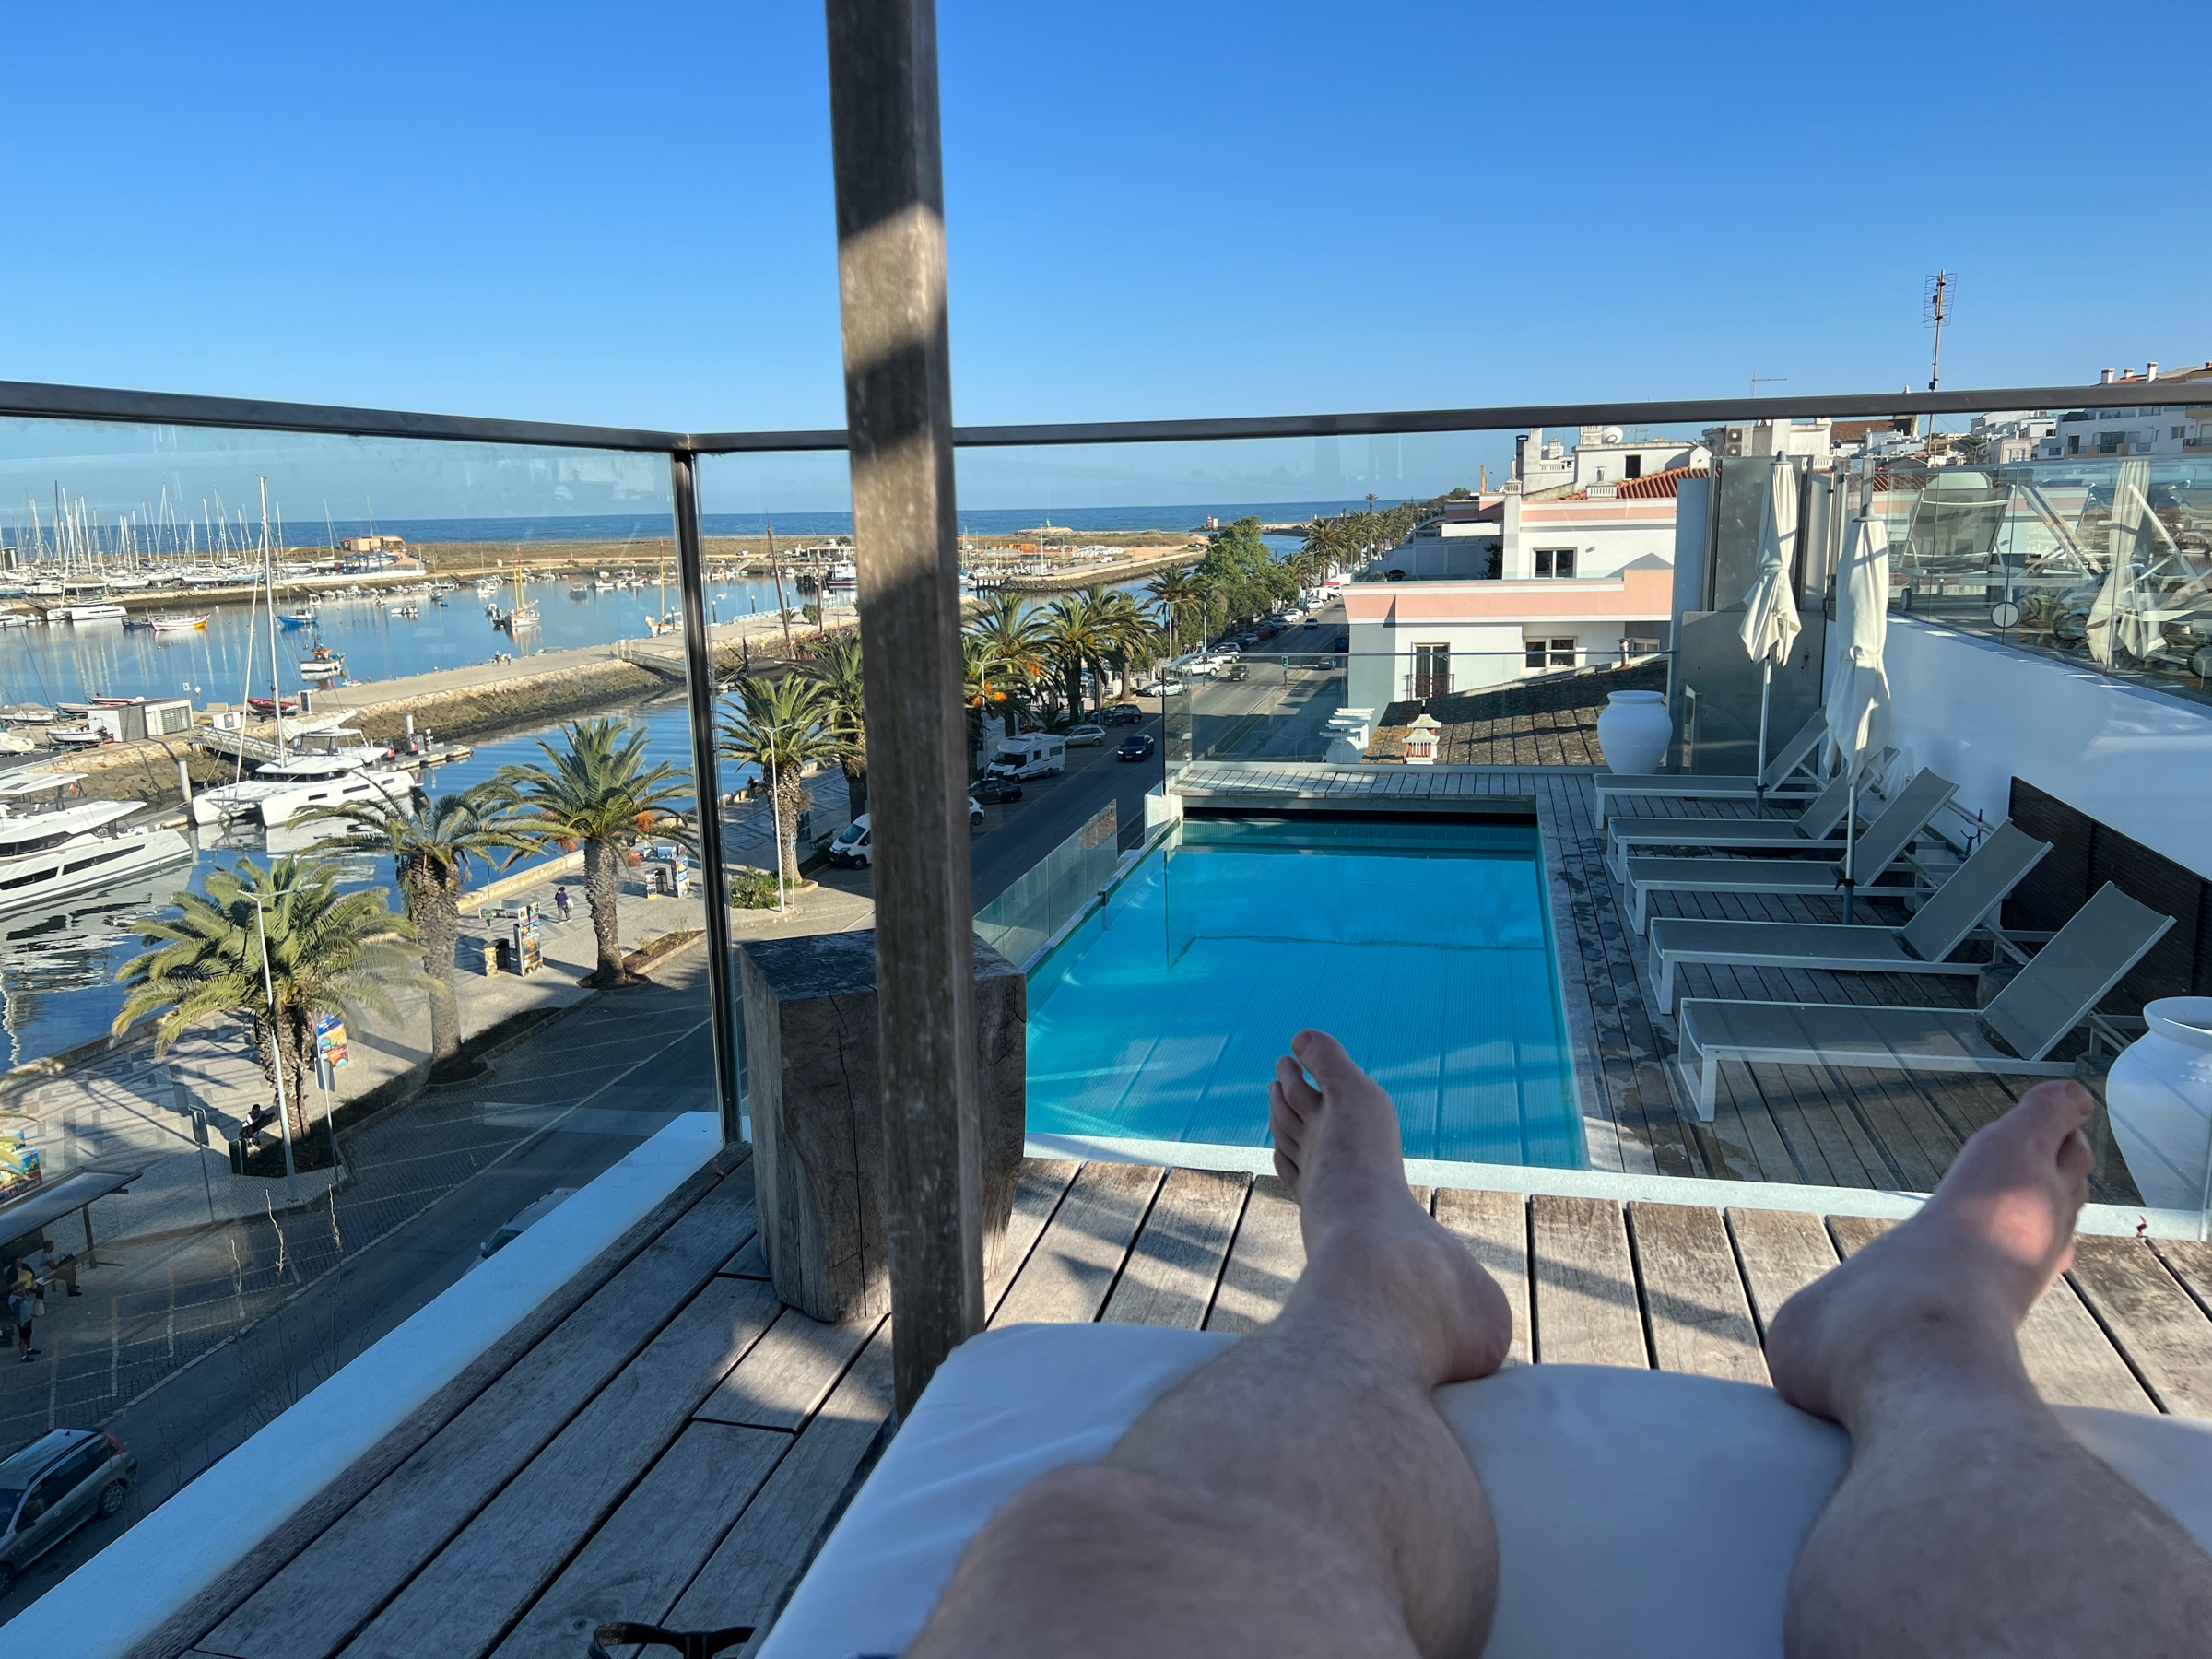 Obligatory photo of my feet in a lounge, with a rooftop pool and harbor views in the background.